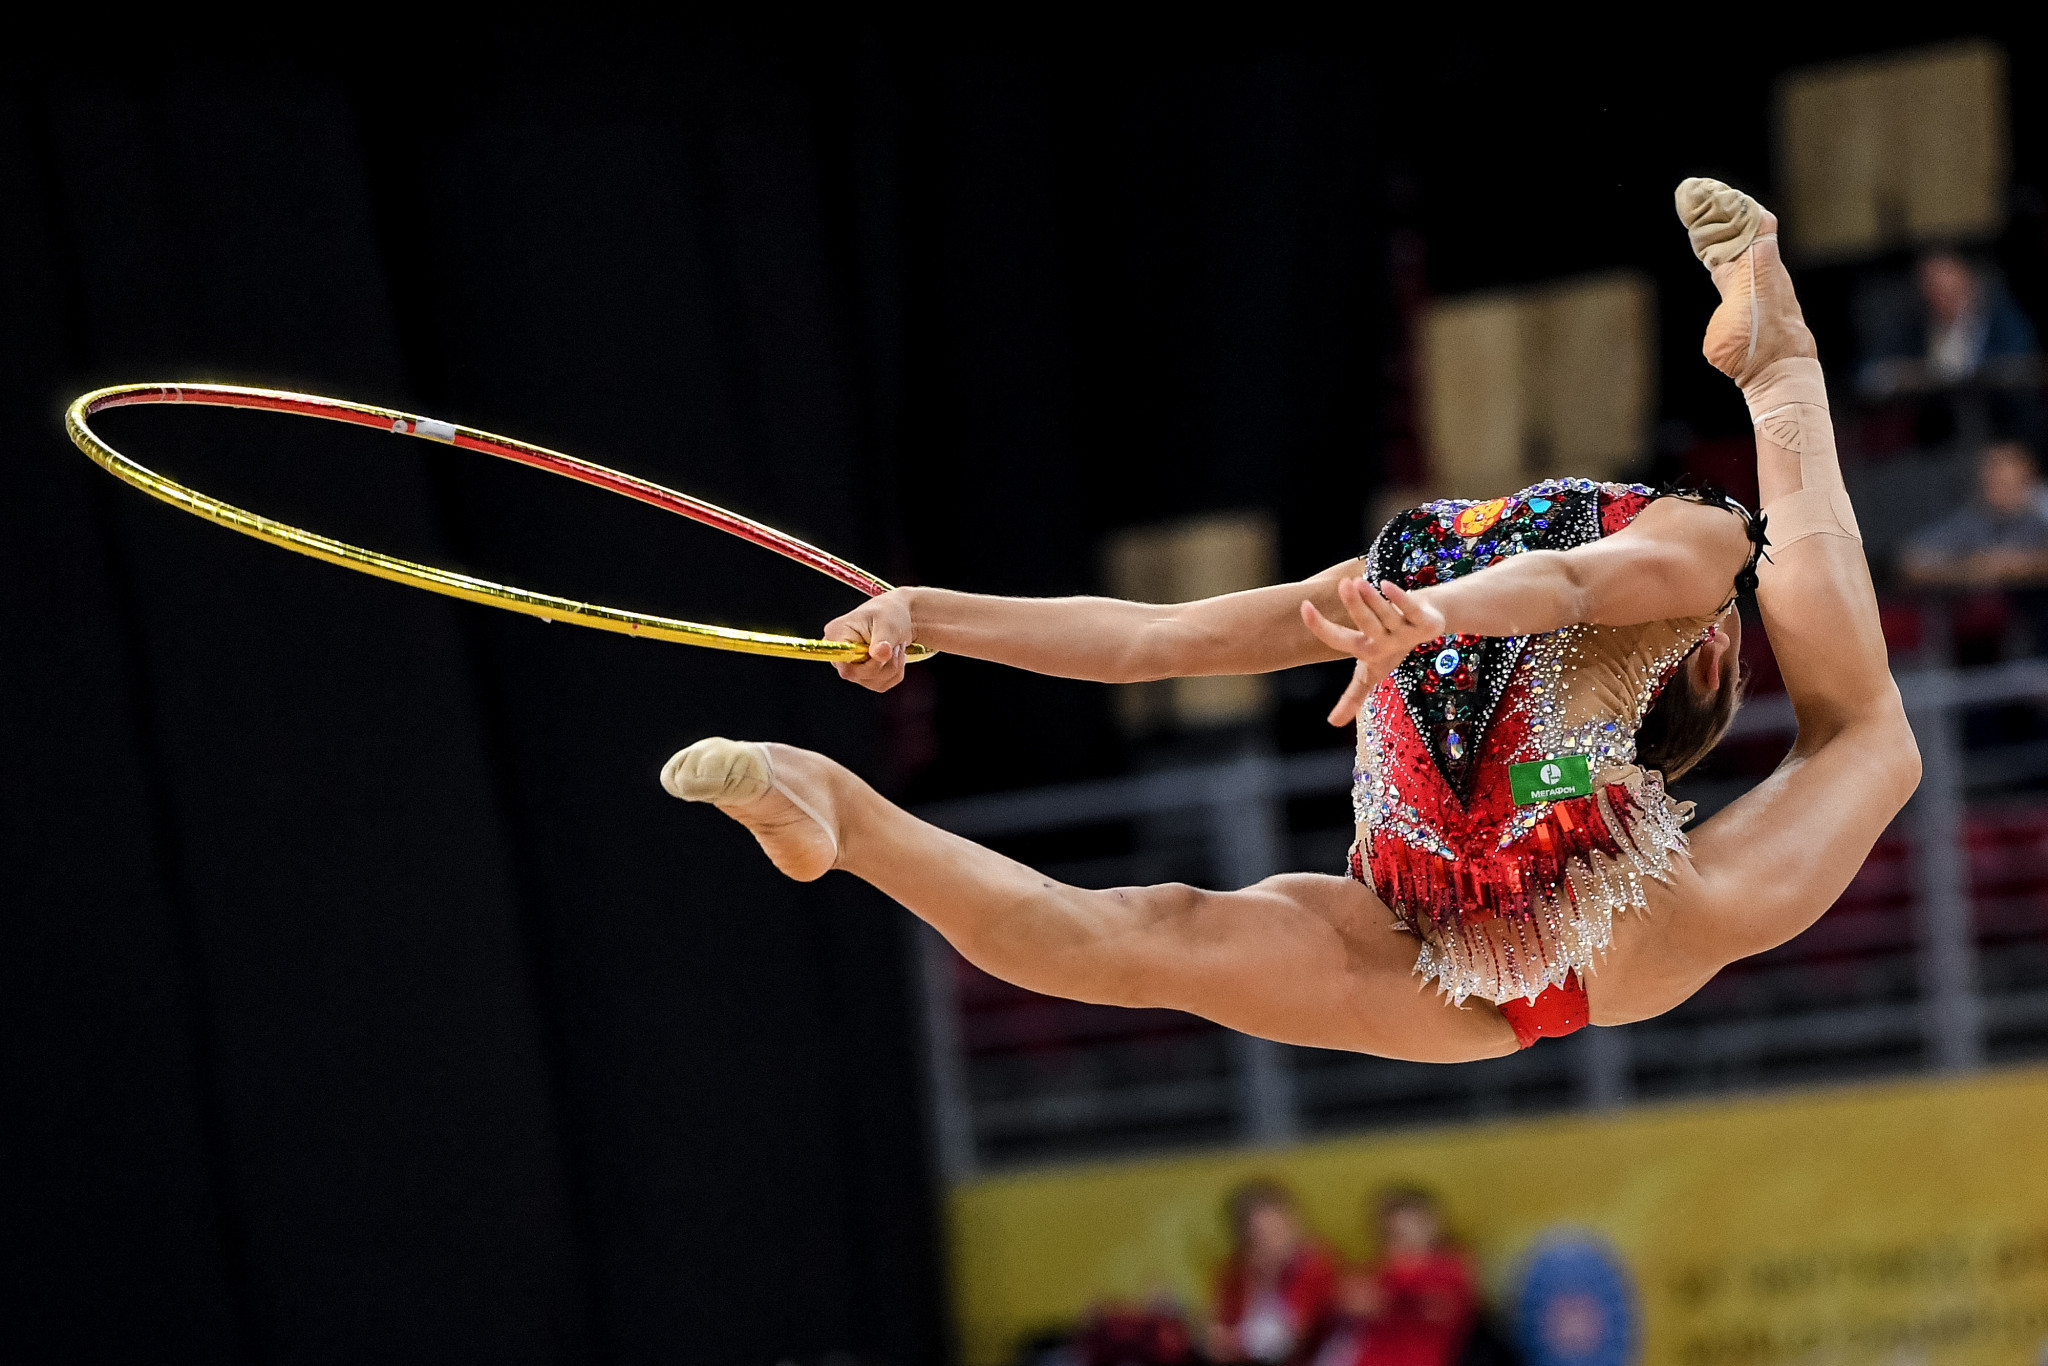 Russian Aleksandra Soldatova dazzled with the hoop, top-scoring in the discipline on her way to all-around bronze ©Getty Images